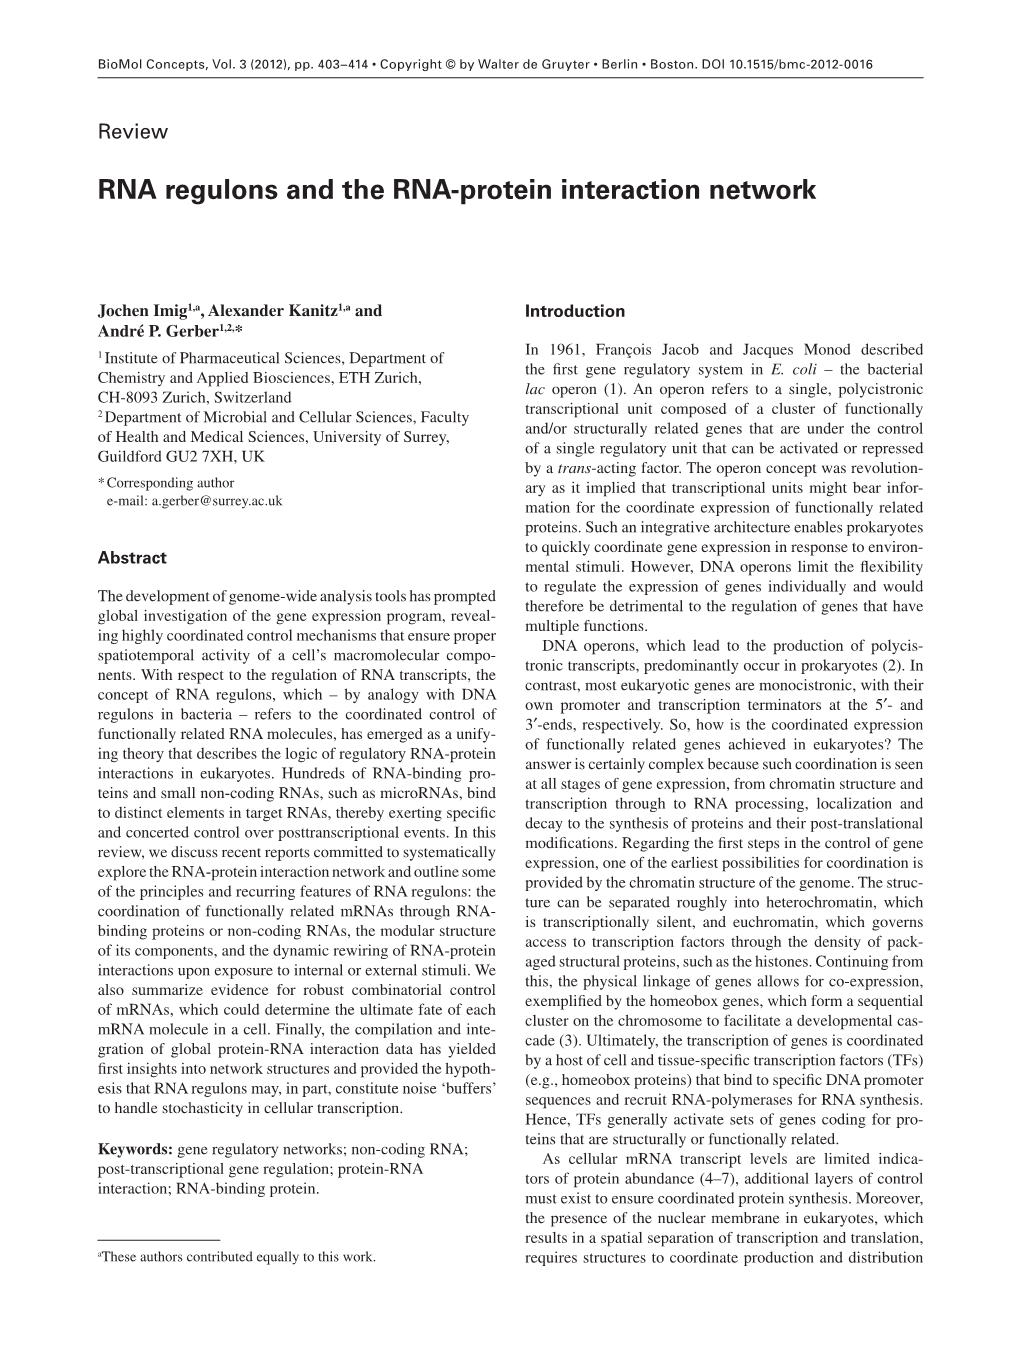 RNA Regulons and the RNA-Protein Interaction Network